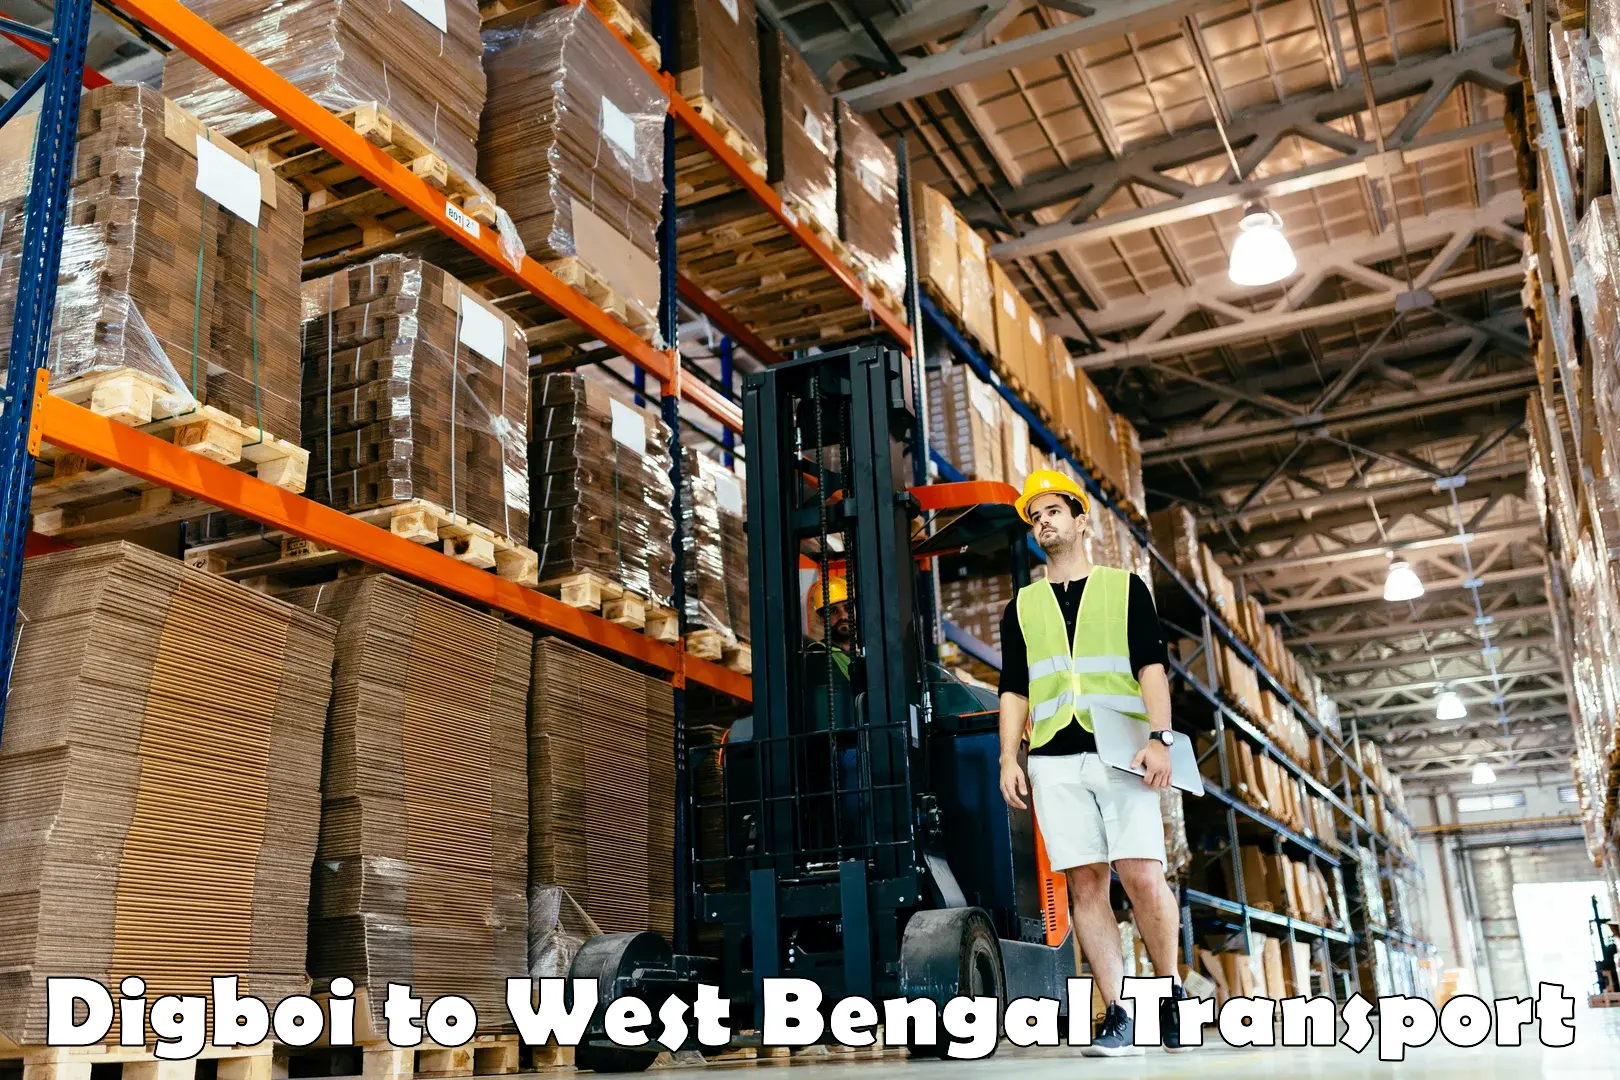 Nearby transport service Digboi to West Bengal